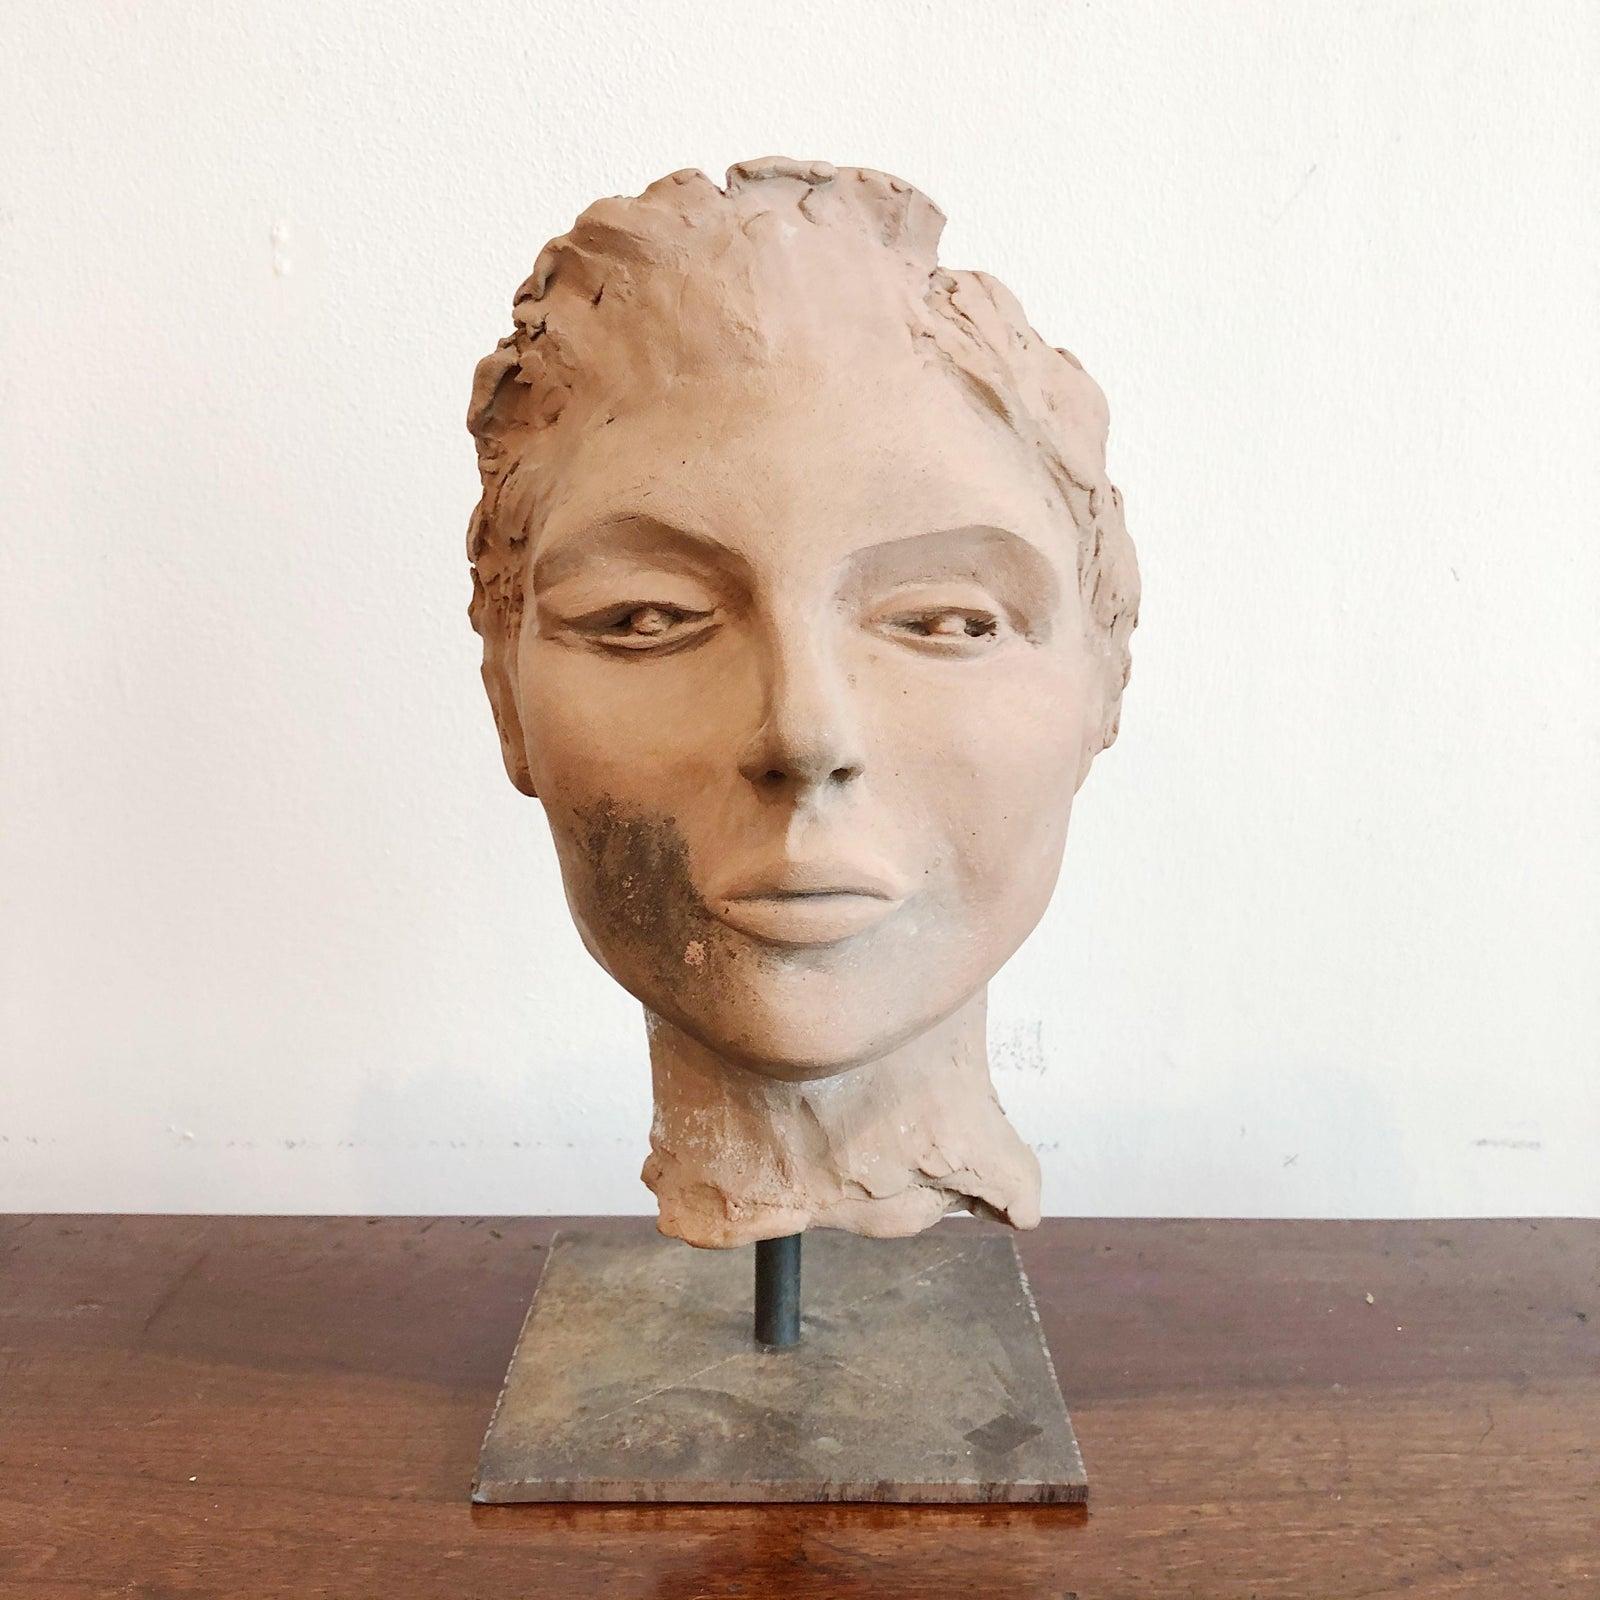 Vintage terra cotta sculpture, pensive in expression, supported by a custom iron base. Unsigned.